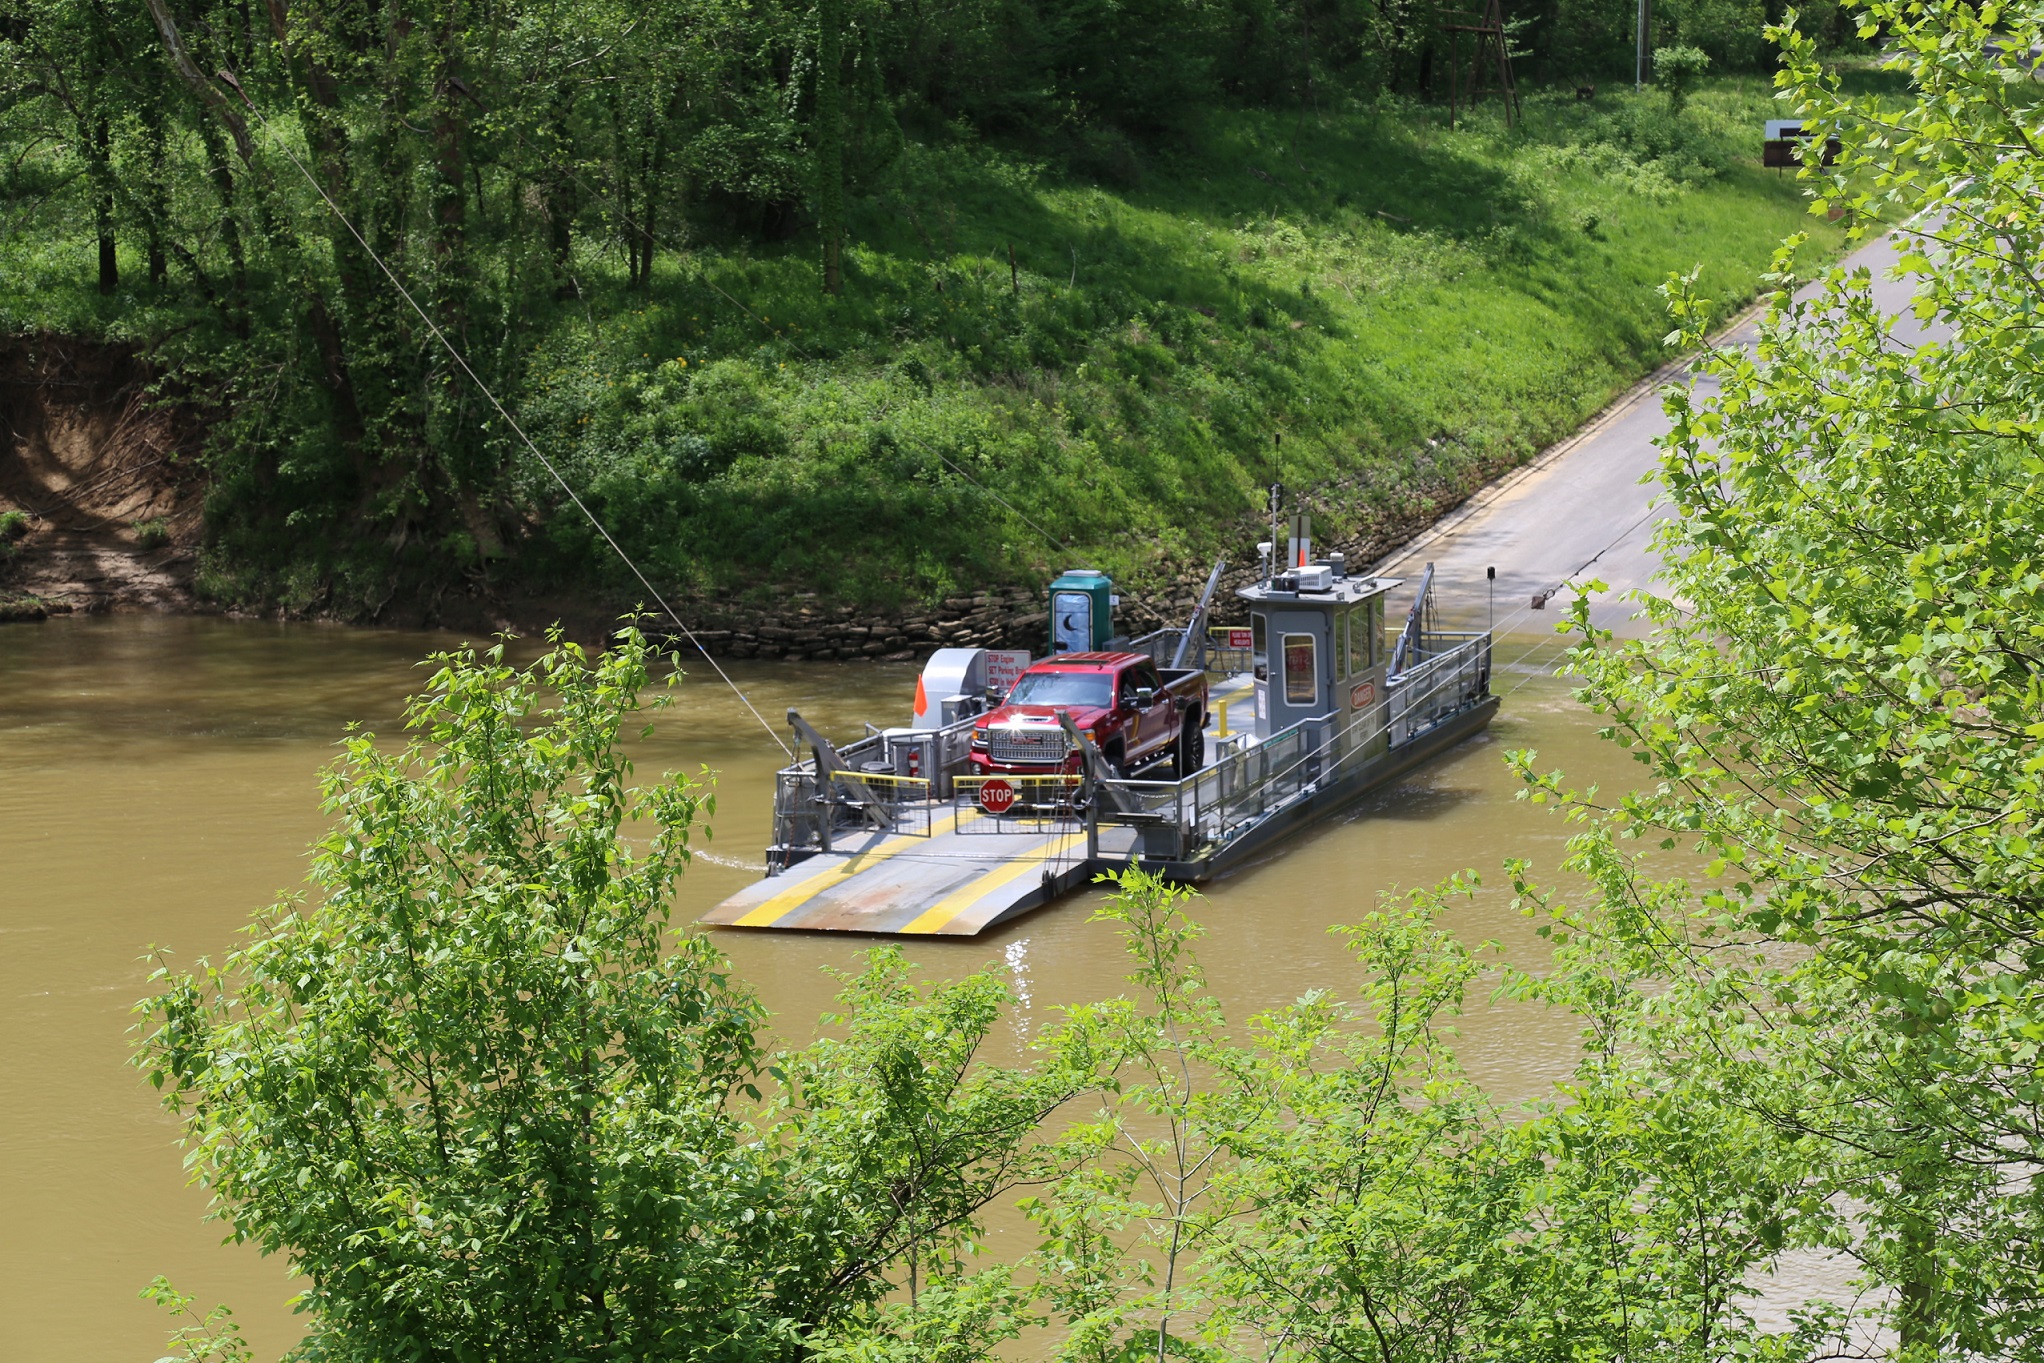 A long gray flat boat carrying a red pickup truck across a brown riverway.